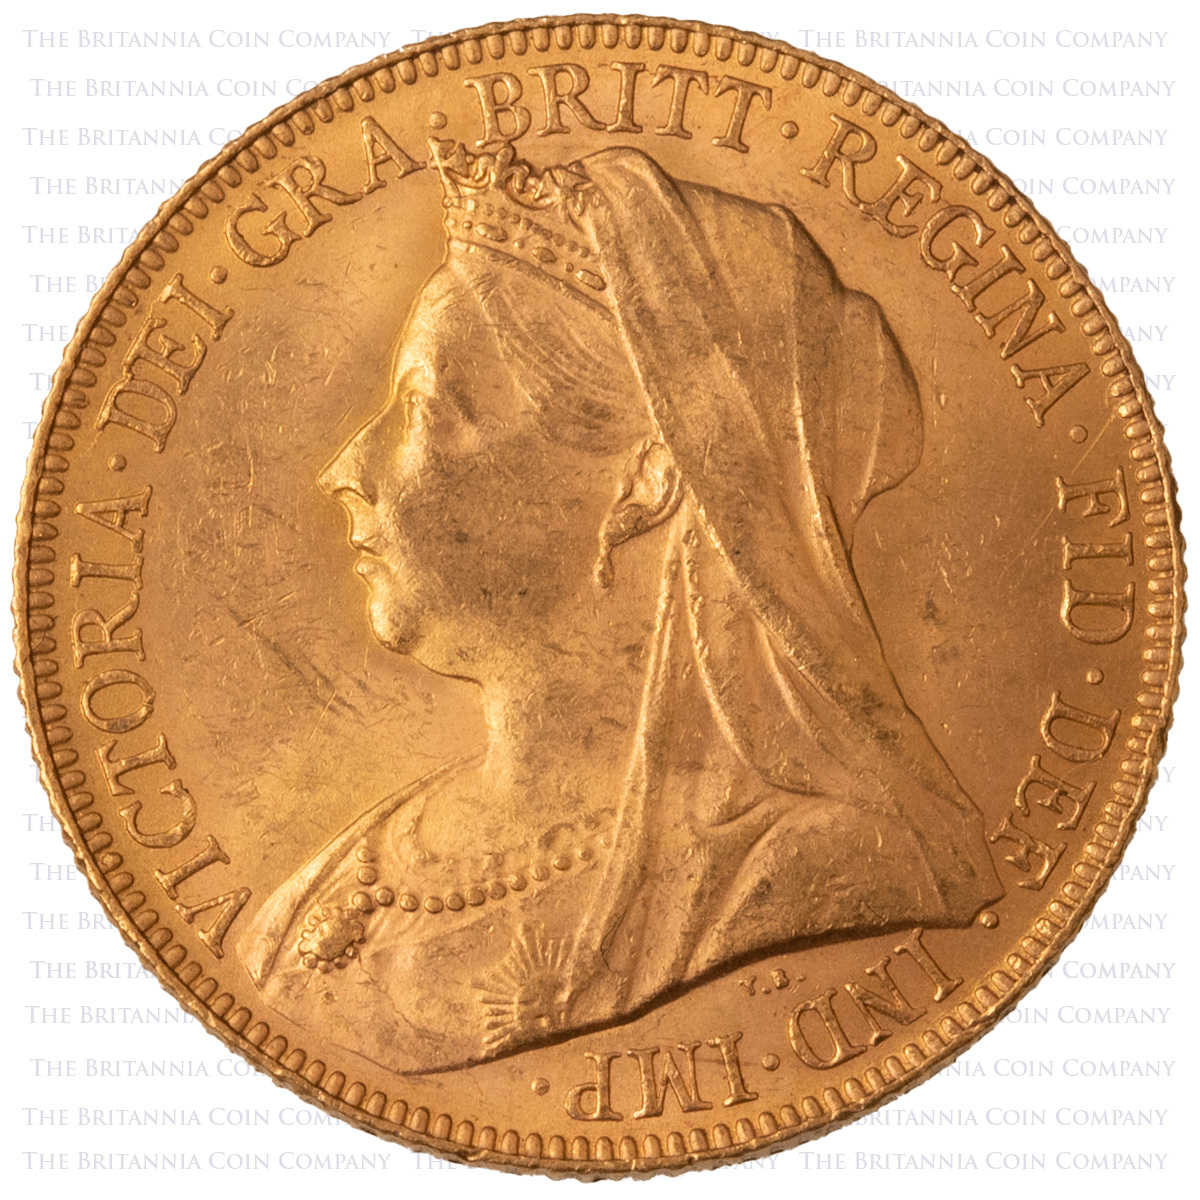 1901 Queen Victoria Gold Full Sovereign Perth Mint Widowed Veiled Old Head Coin Obverse